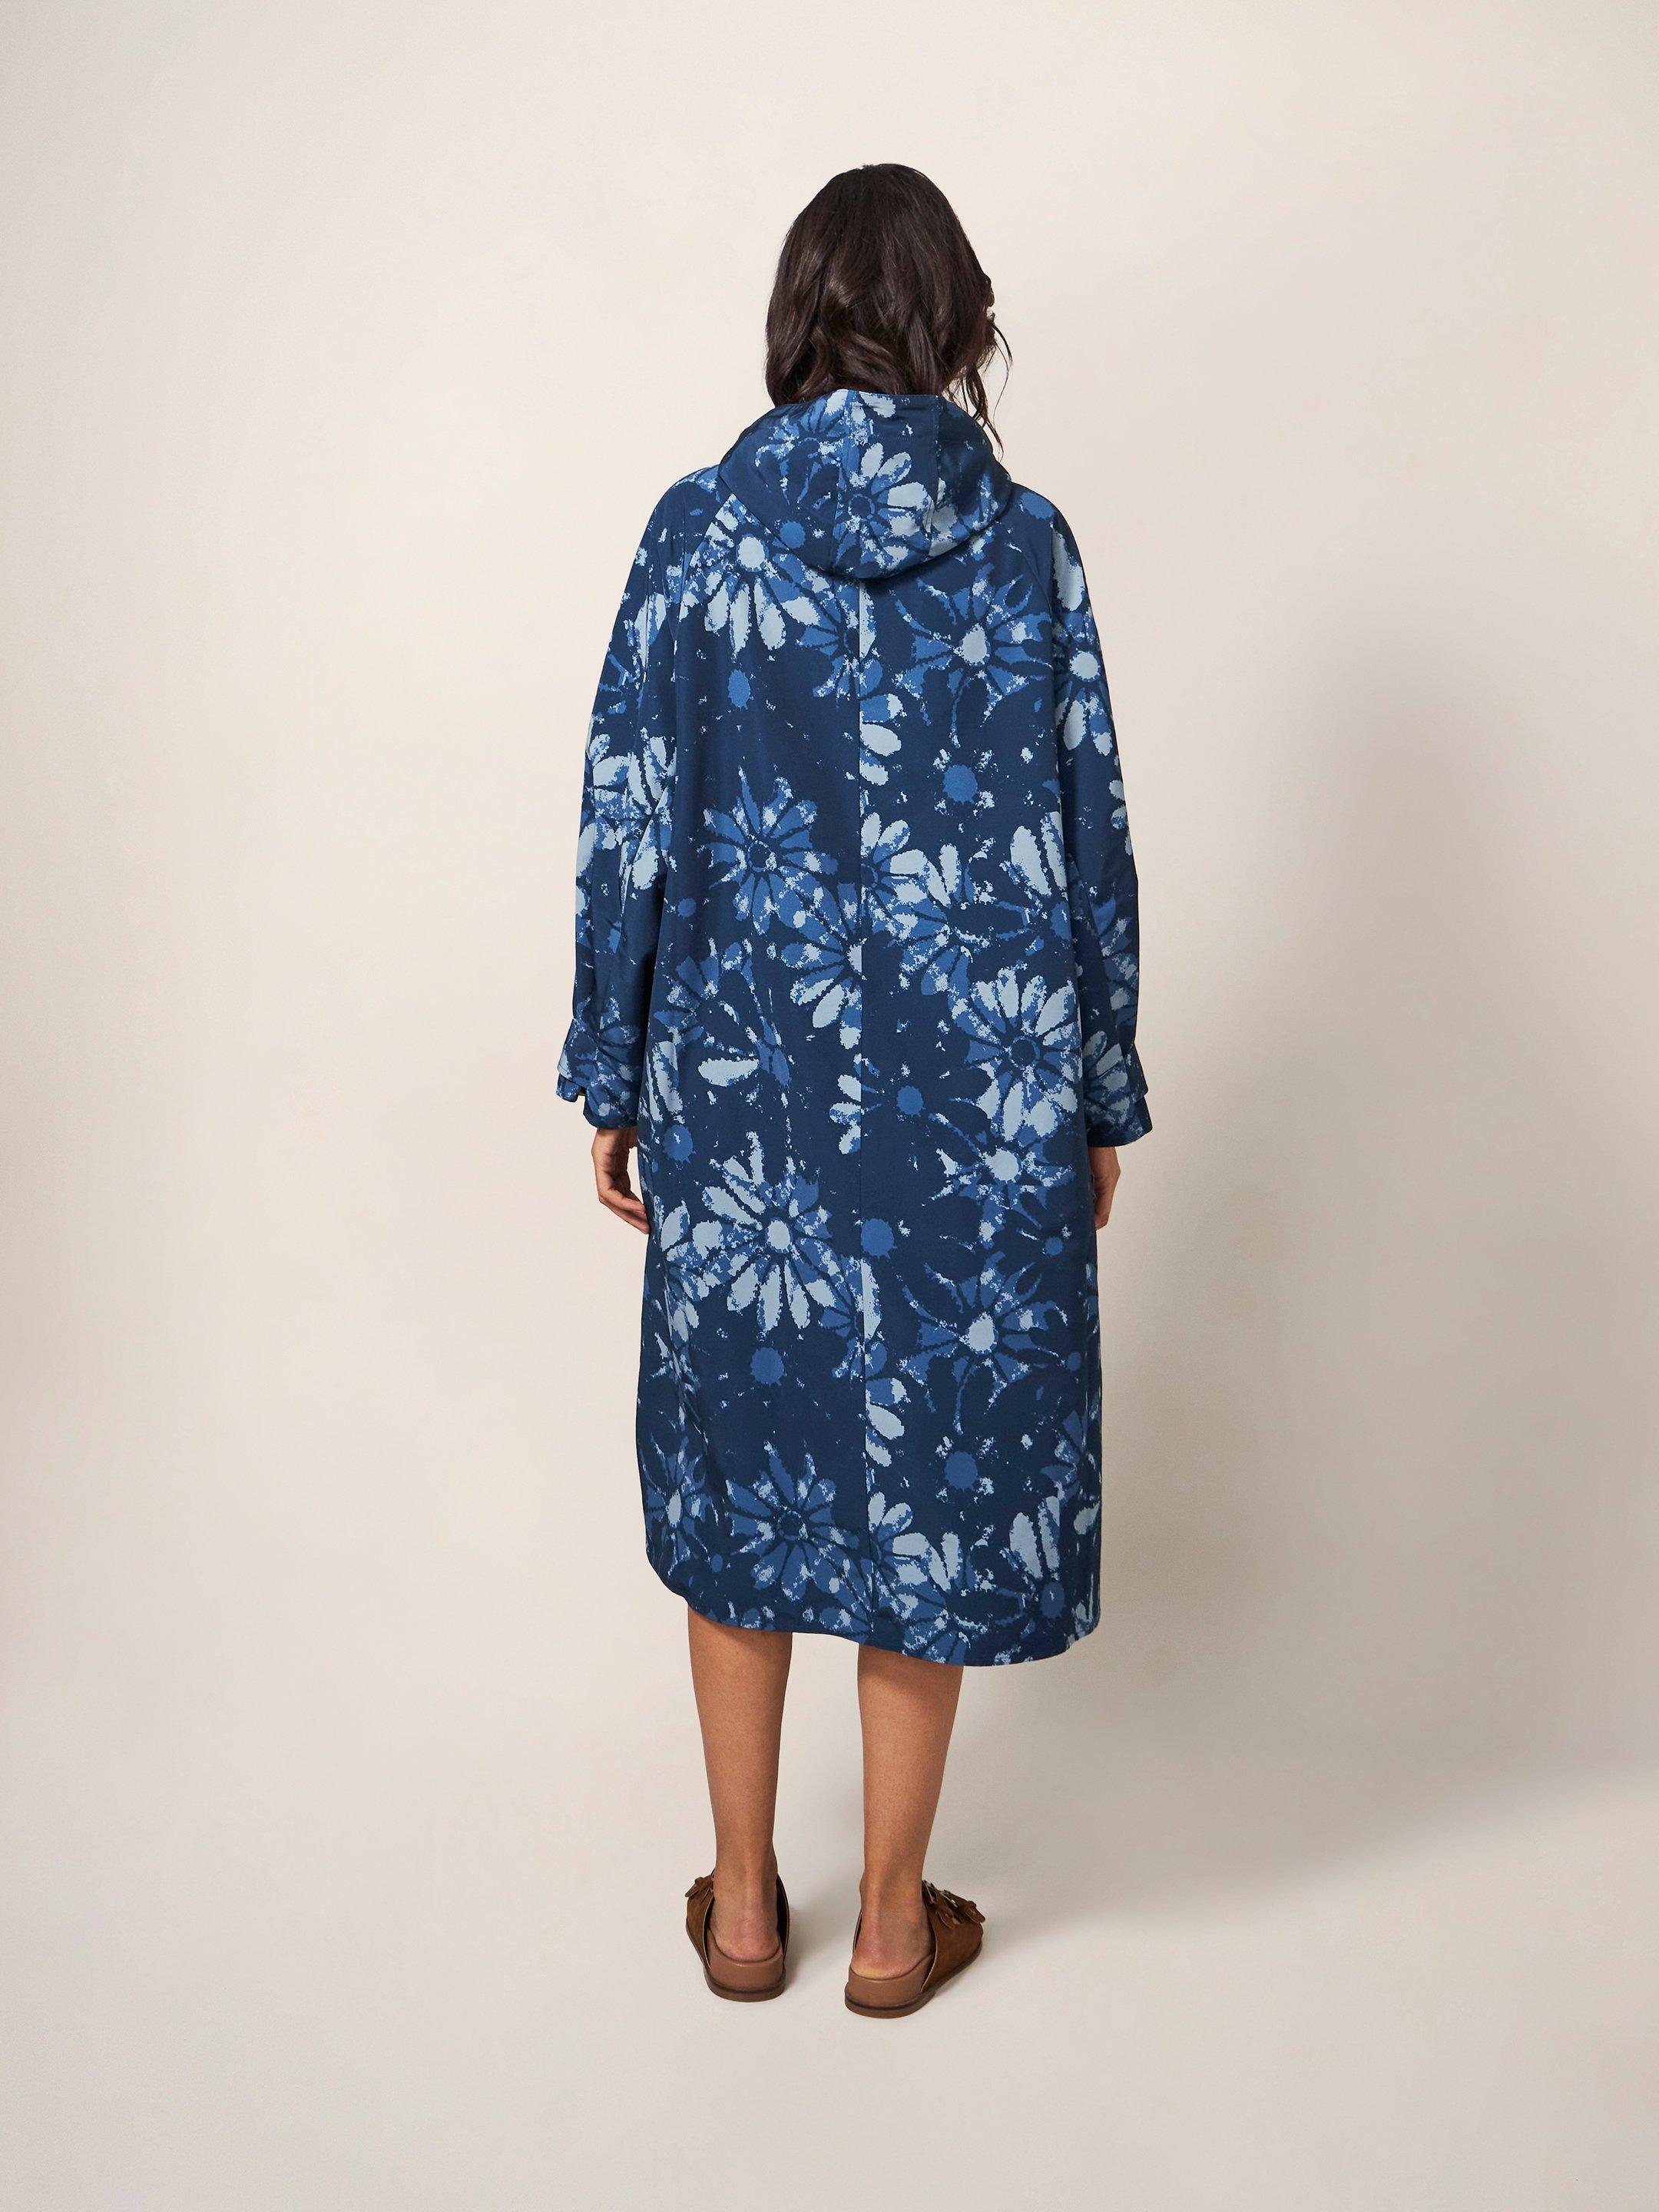 Evie Printed Changing Robe in BLUE PR - MODEL BACK